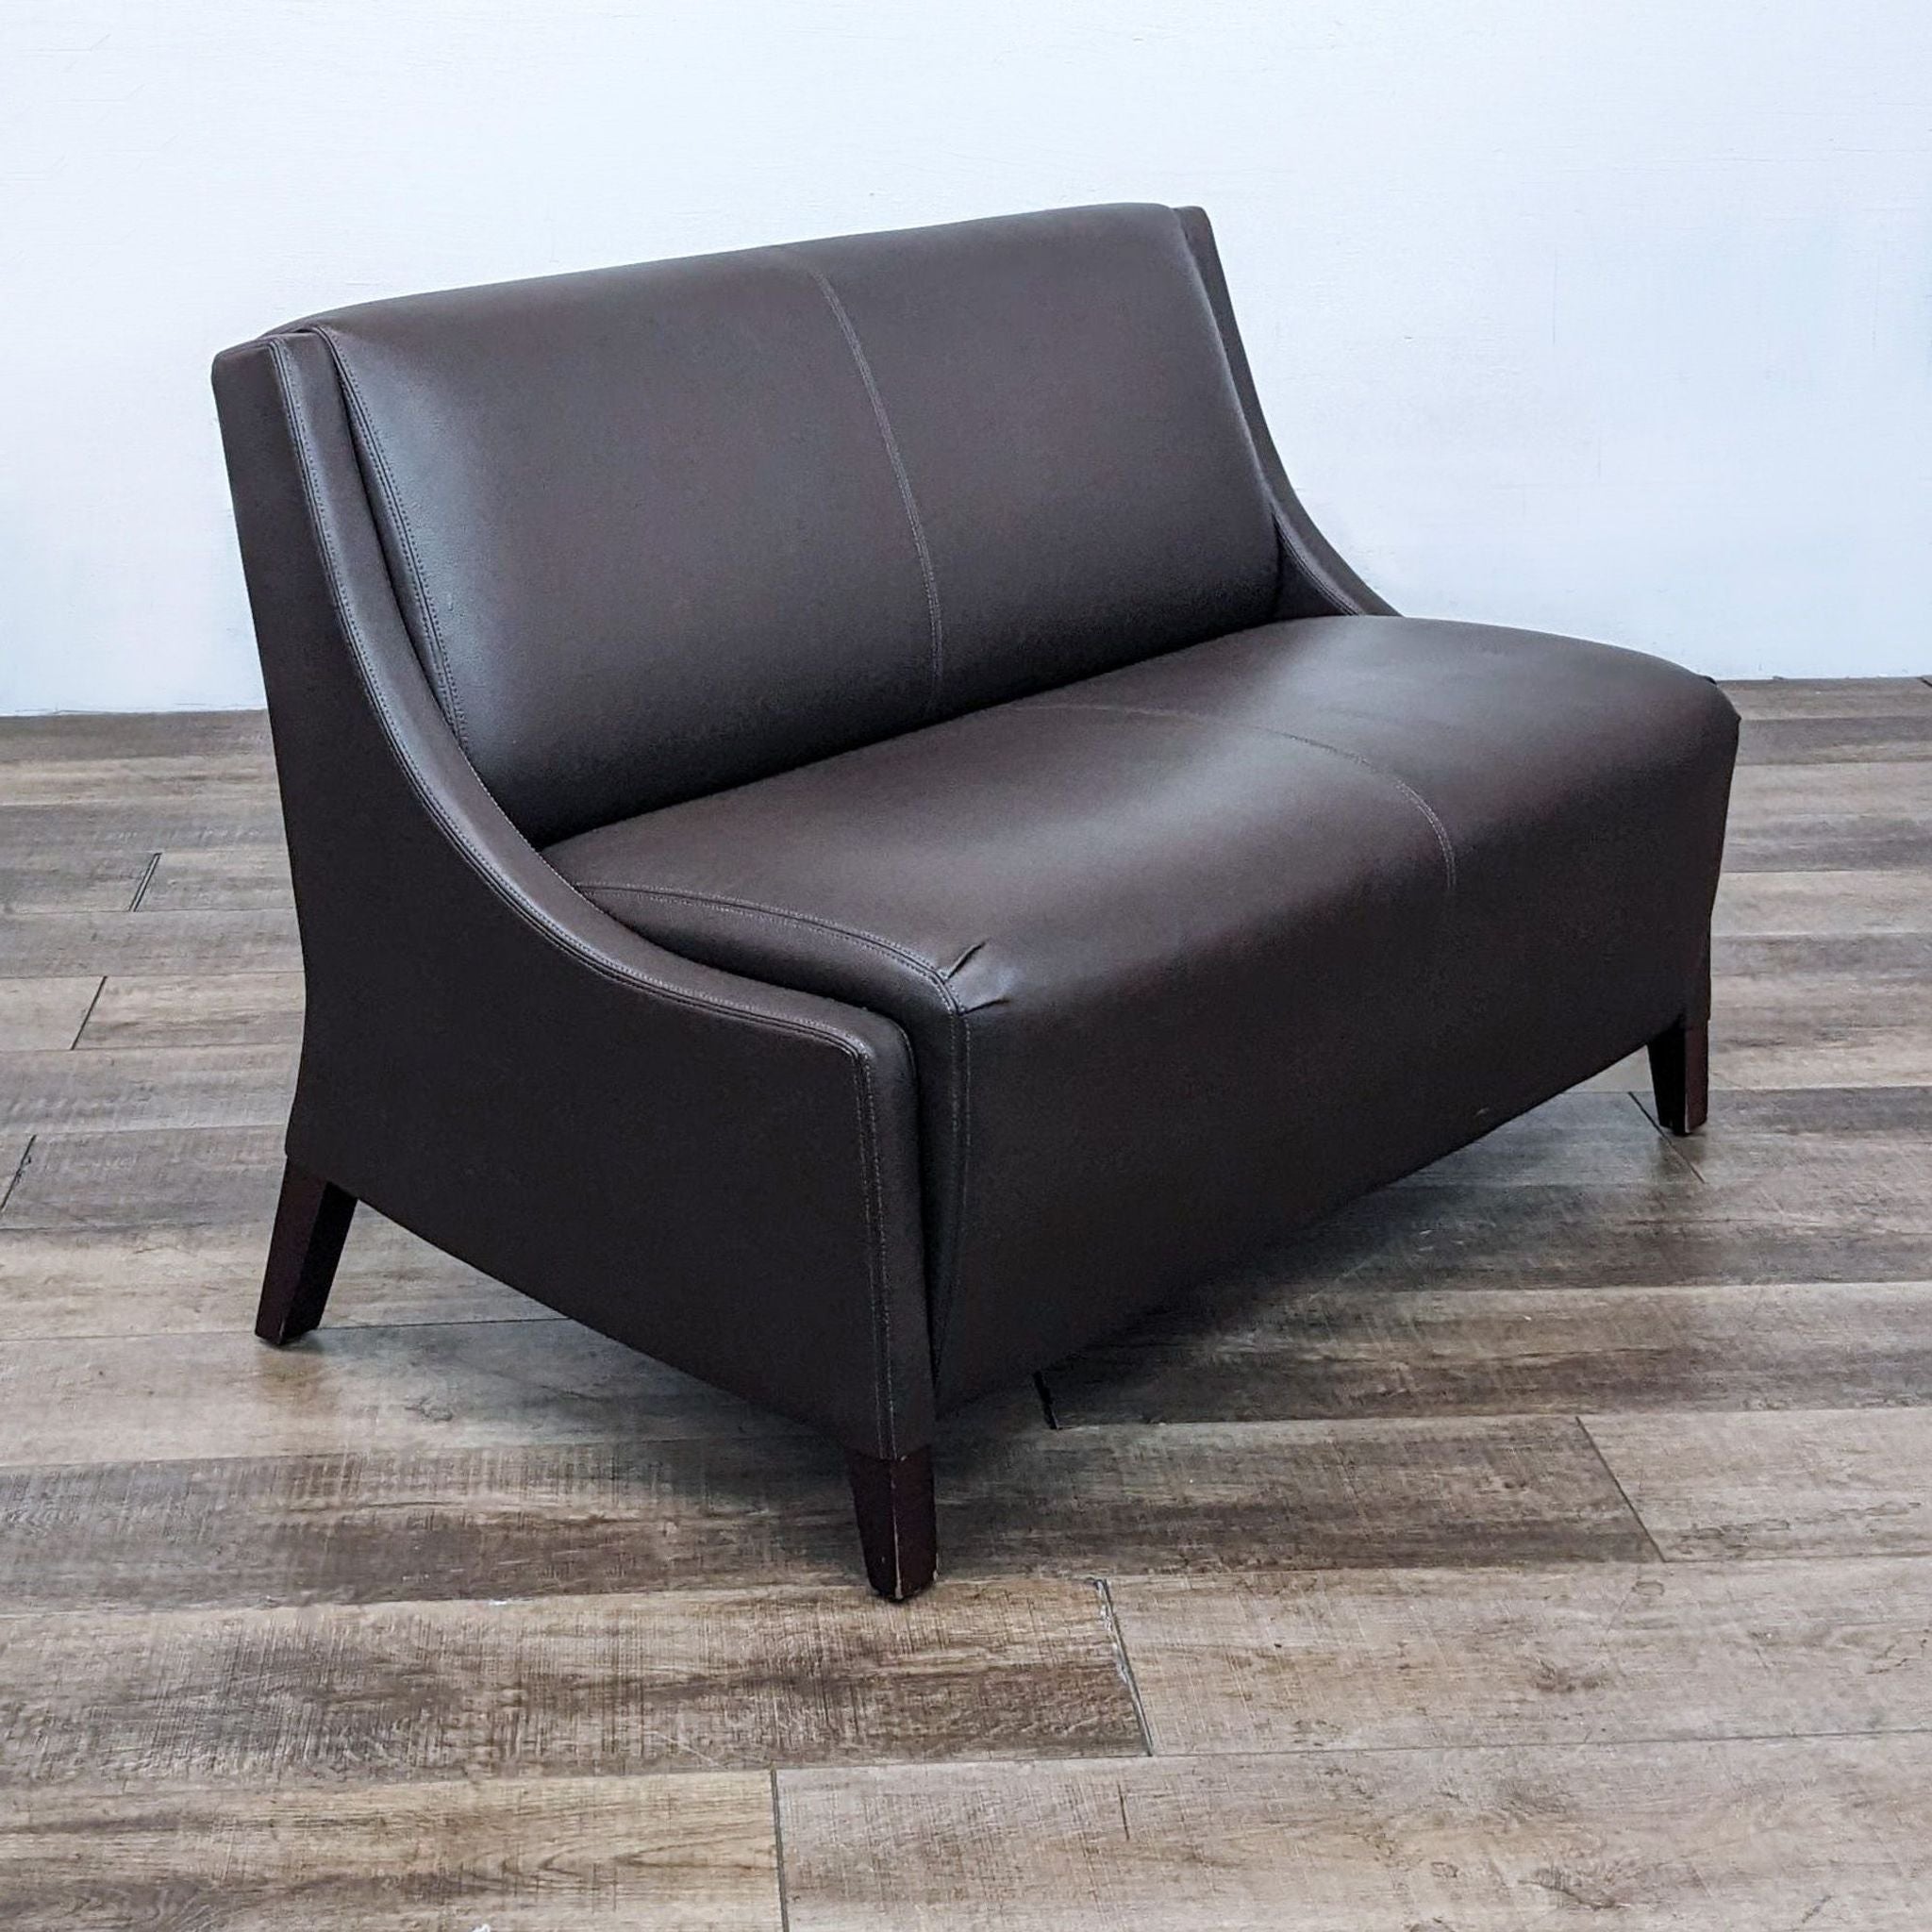 Brown Reperch 78" loveseat showing a close-up of the leather texture and stitching details on a wooden floor backdrop.